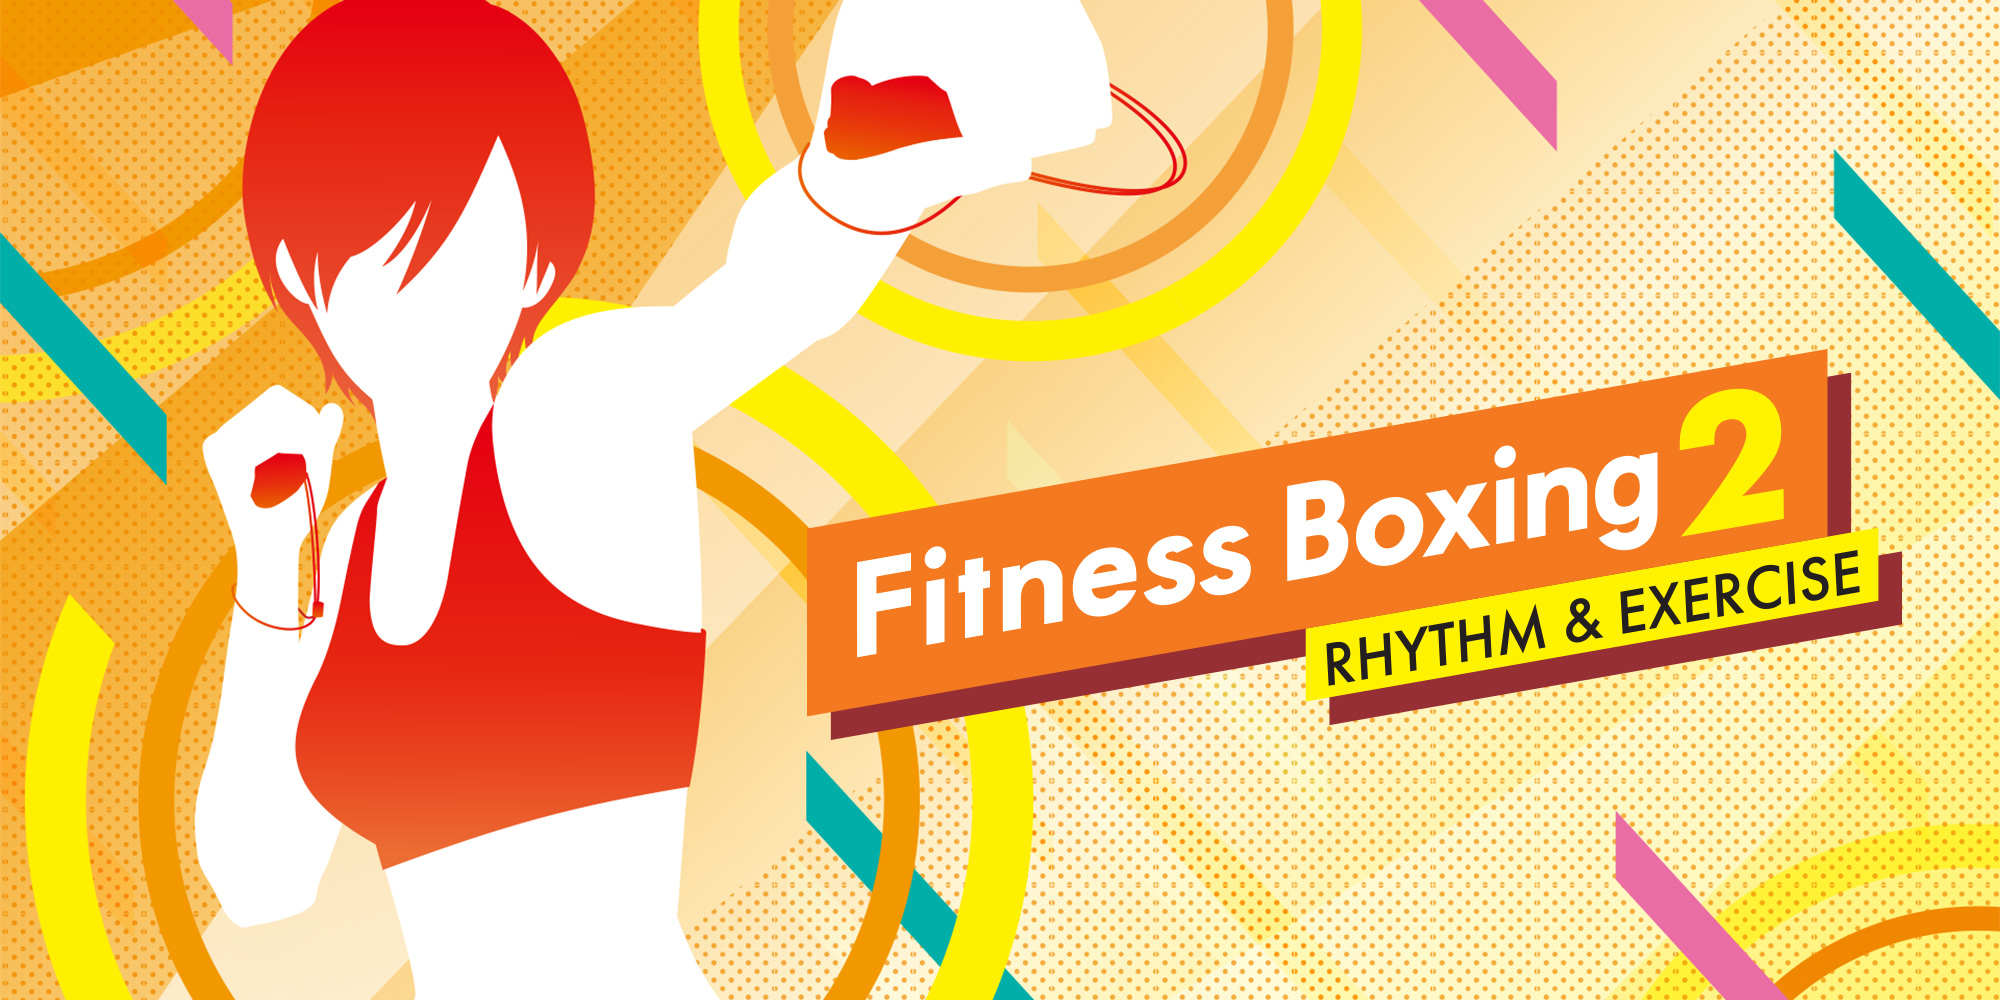 You are currently viewing Демоверсия игры Fitness Boxing 2: Rhythm and Exercise уже доступна!